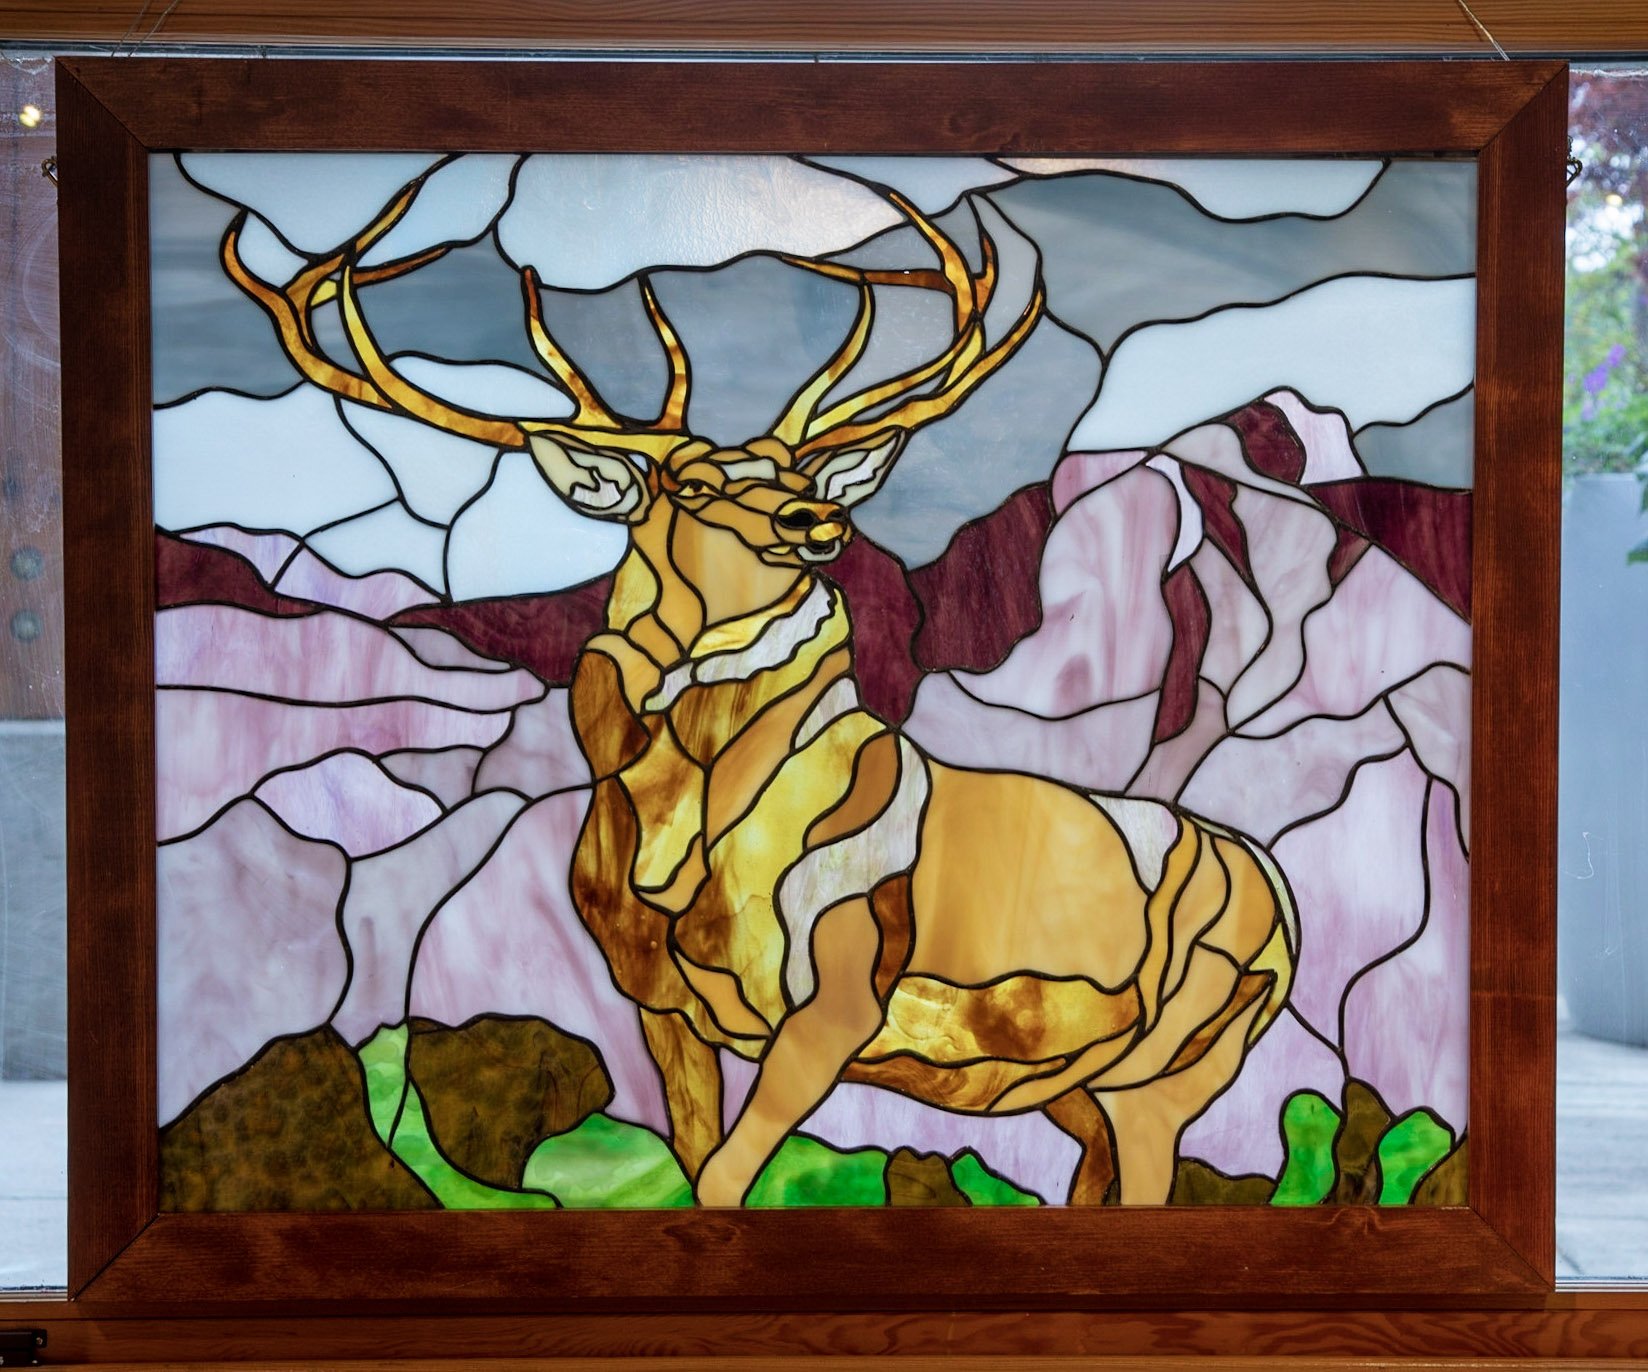 Ralph Kraft, "The Stag," stained glass